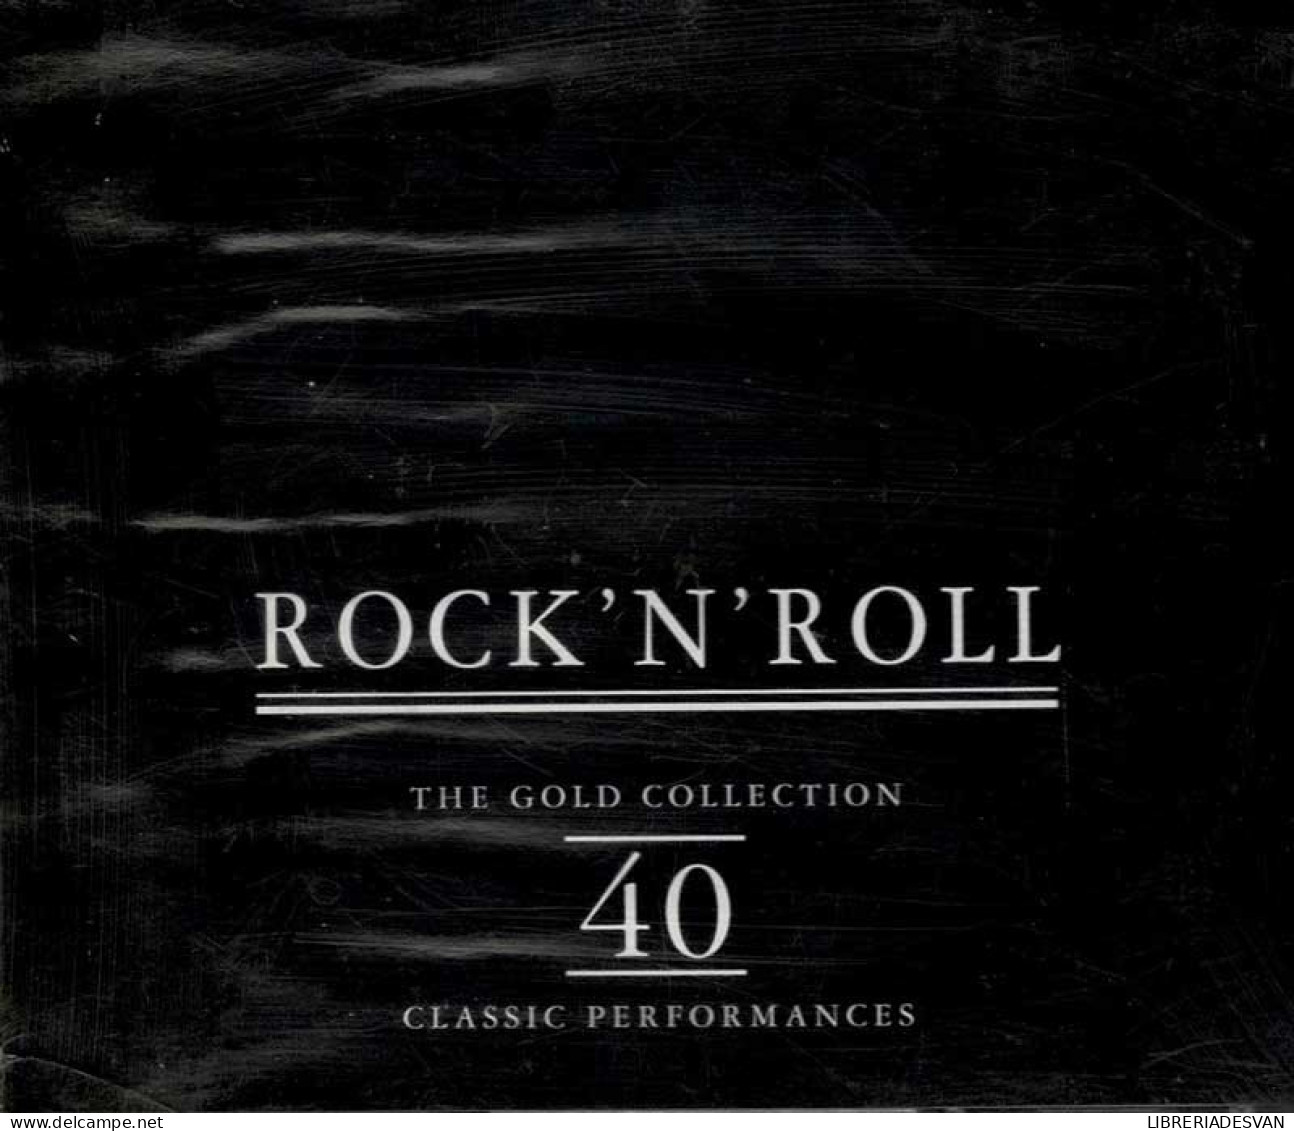 Rock 'N' Roll. The Gold Collection. 40 Classic Performances. 2 X CD - Rock